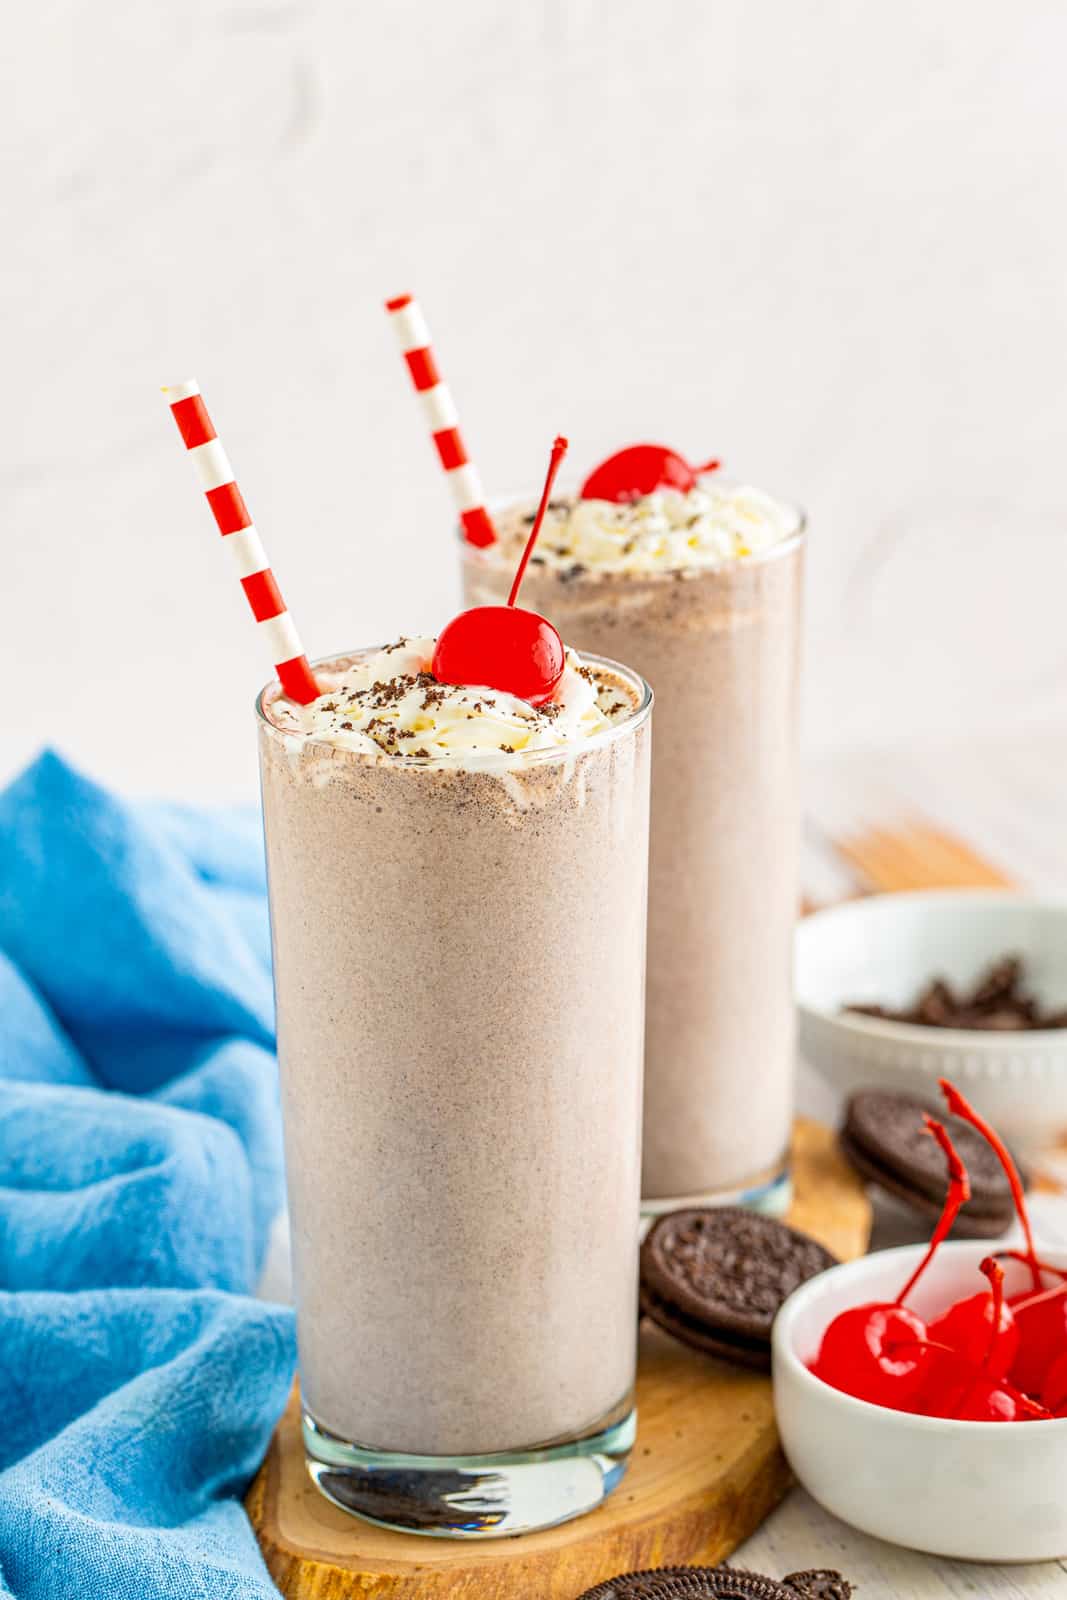 Two milkshakes on wooden board with straws and cherries